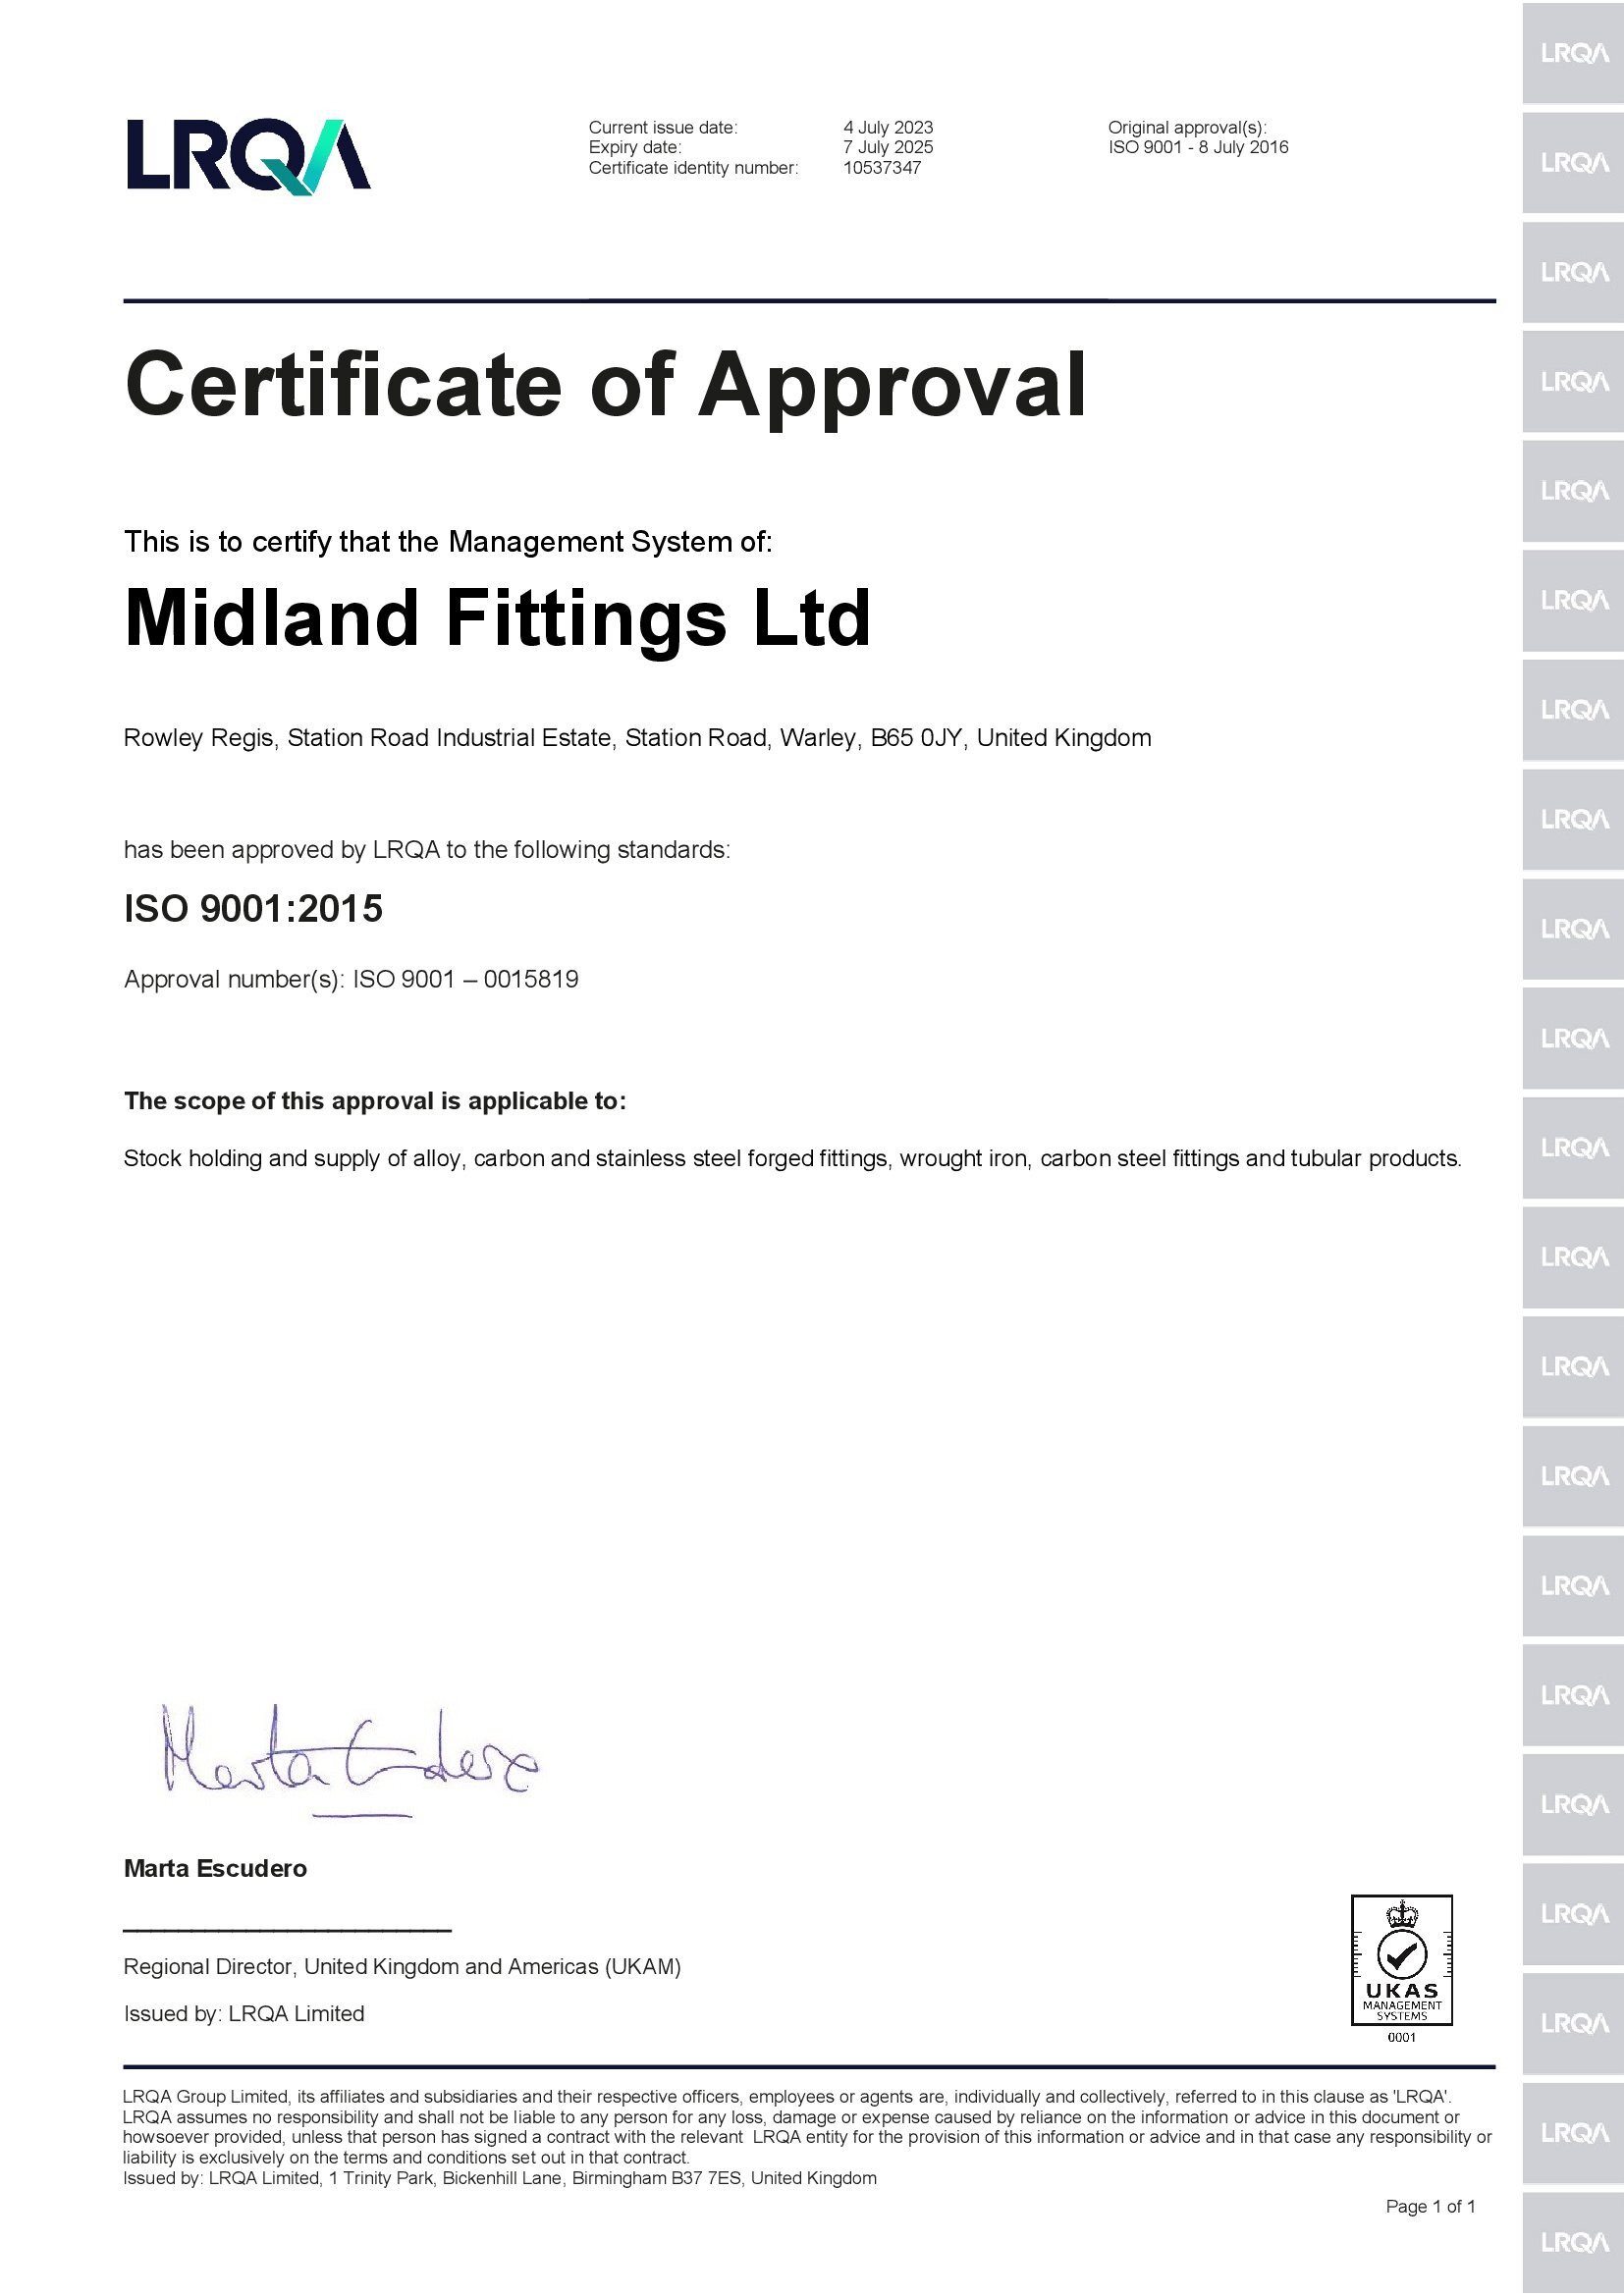 Customer service atandards  are ISO 9001:2015 rated